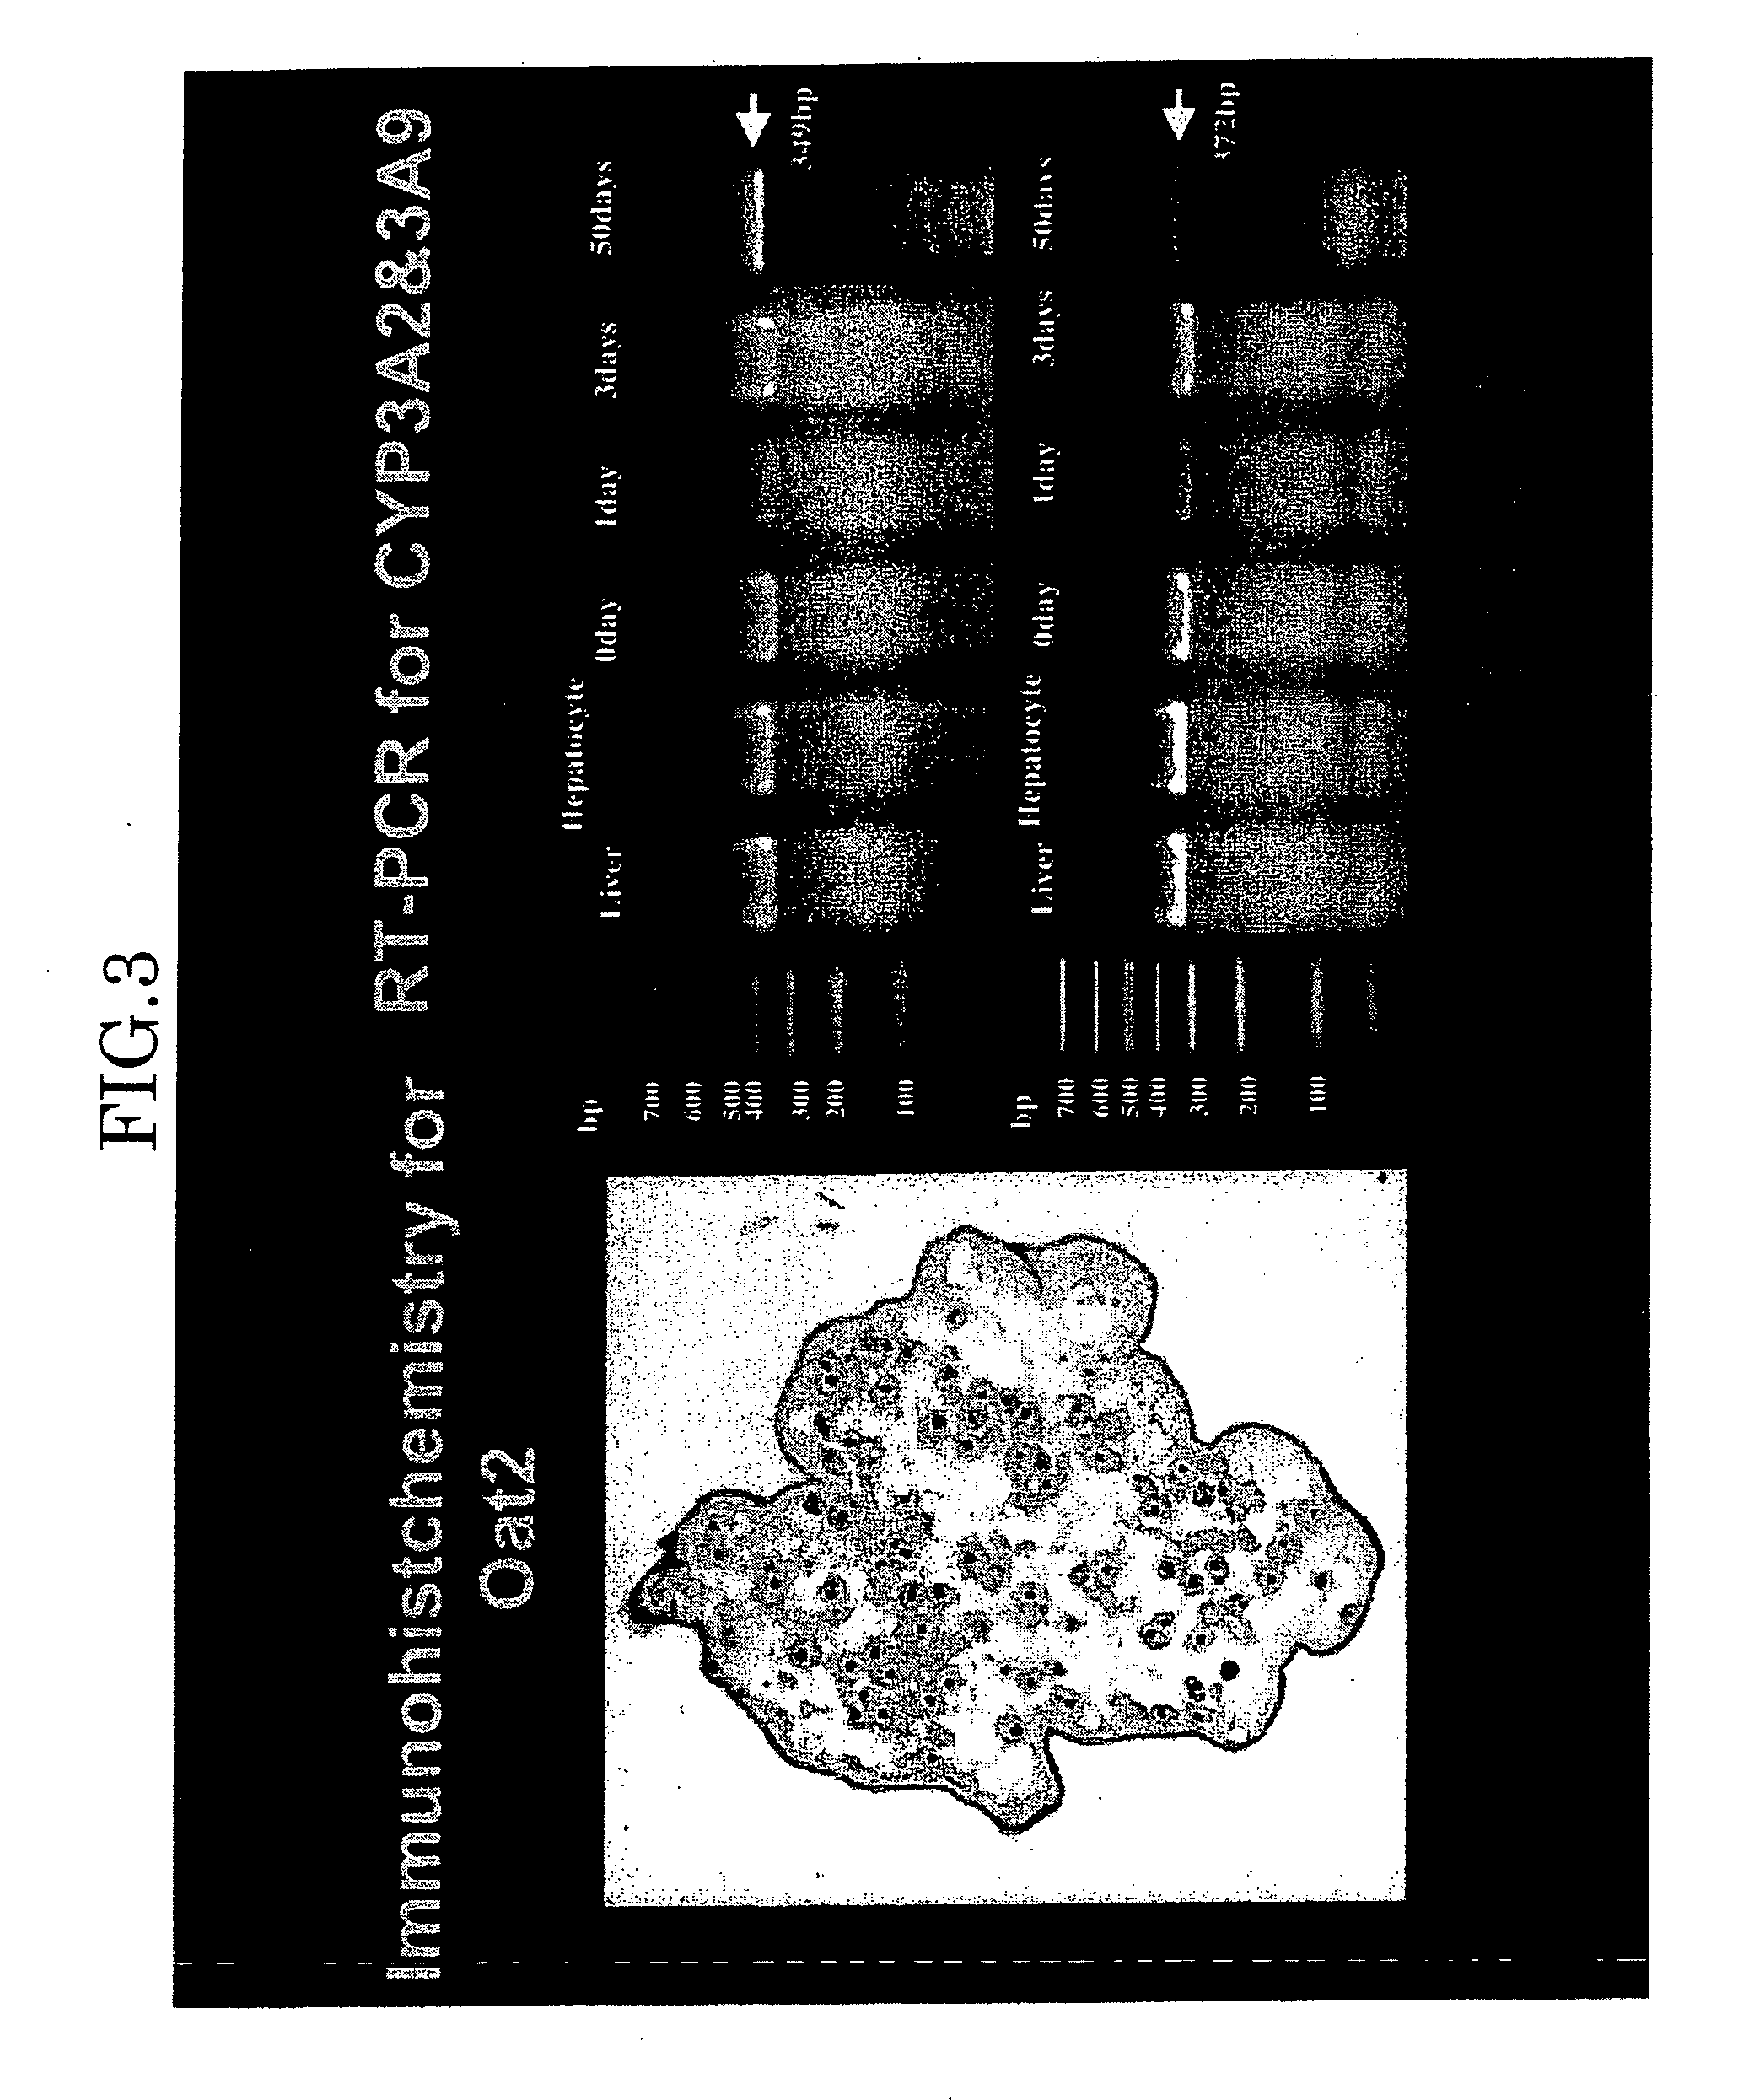 Method for cryopreserving microencapsulated living animal cells enclosed in immunoisolation membranes, such microencapsulated living animal cells in immunoisolation membranes, and biohybrid artificial organ modules using such microencapsulated living animal cells in immunoisolation membranes